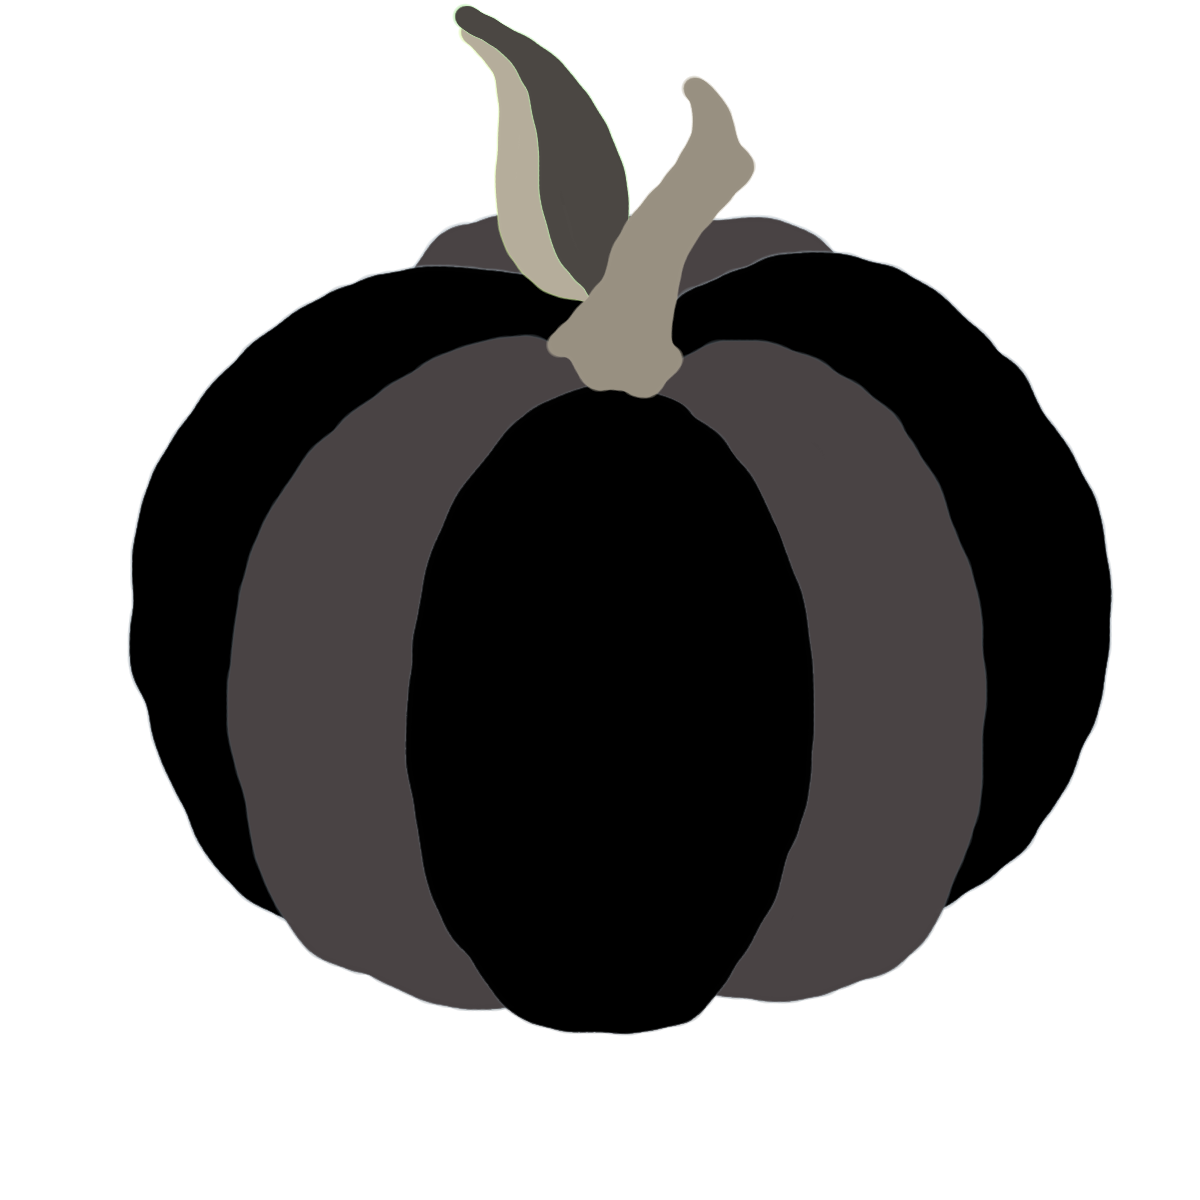 white and black pumpkin clipart png.